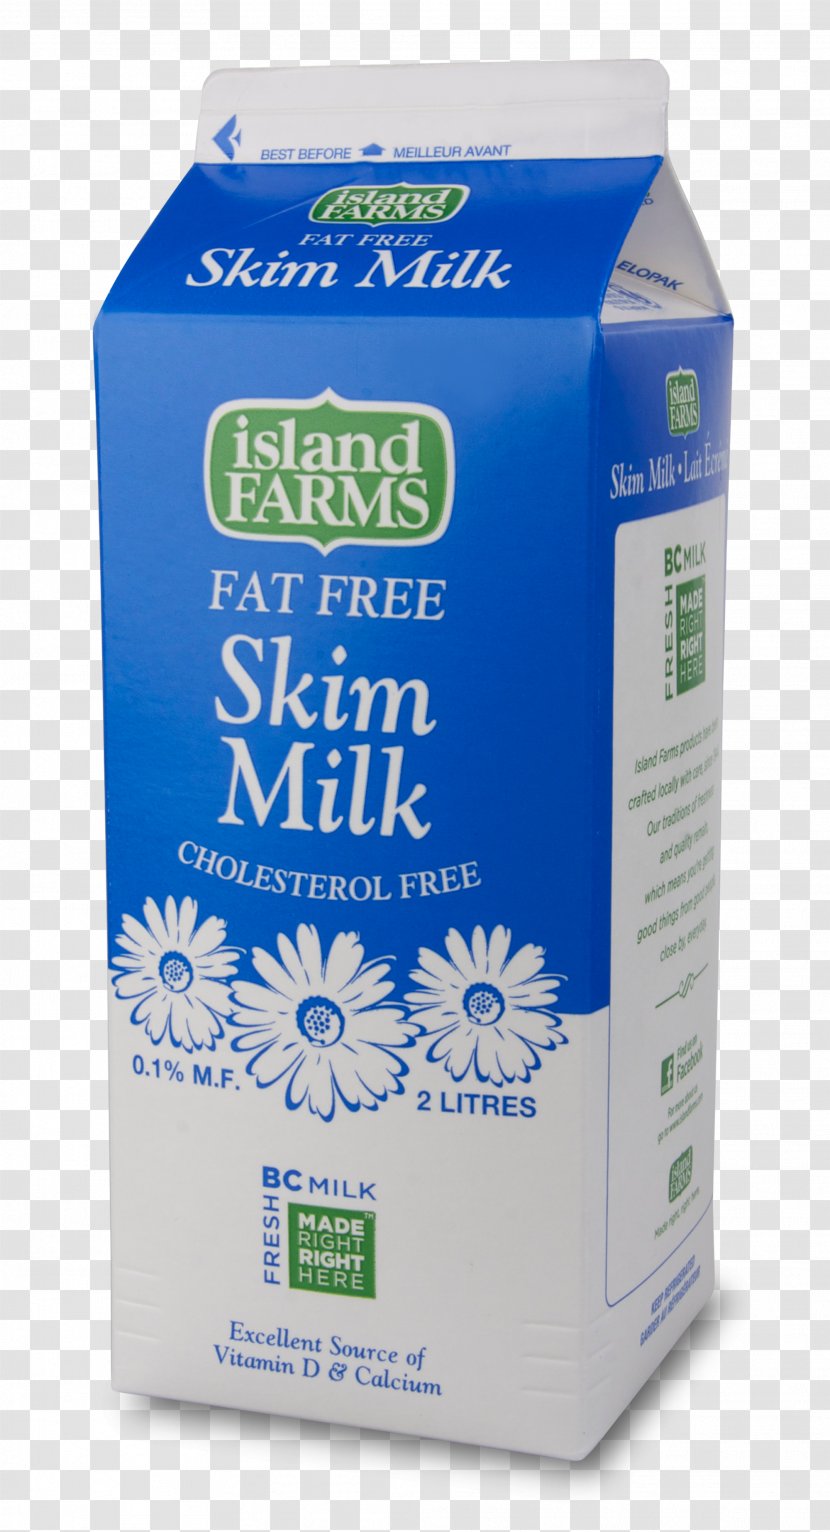 Water Product Agropur Cooperative (Island Farms) - Island Farms - White Chocolate Milk Carton Transparent PNG